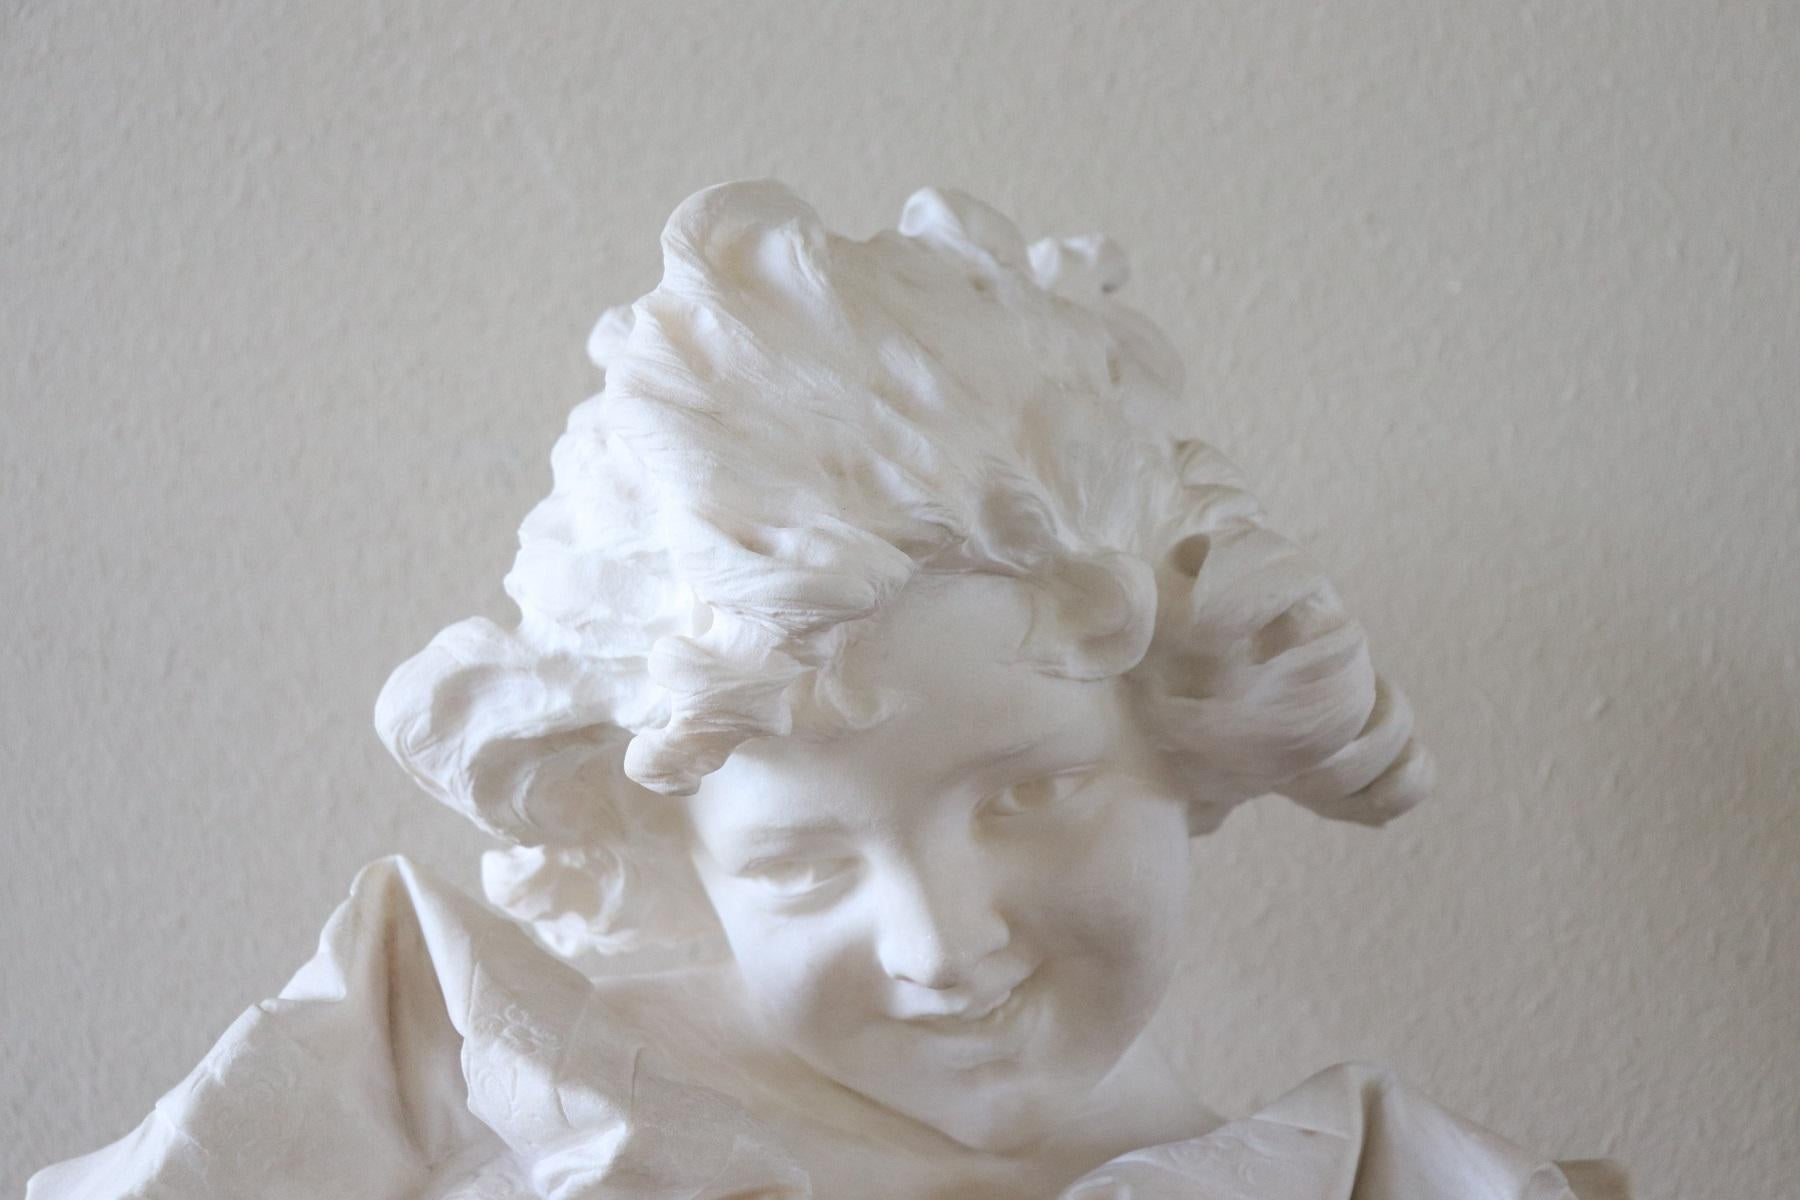 Carved 19th Century Italian Artist Carrara Marble Bust of a Child Sculpture by A Frilli